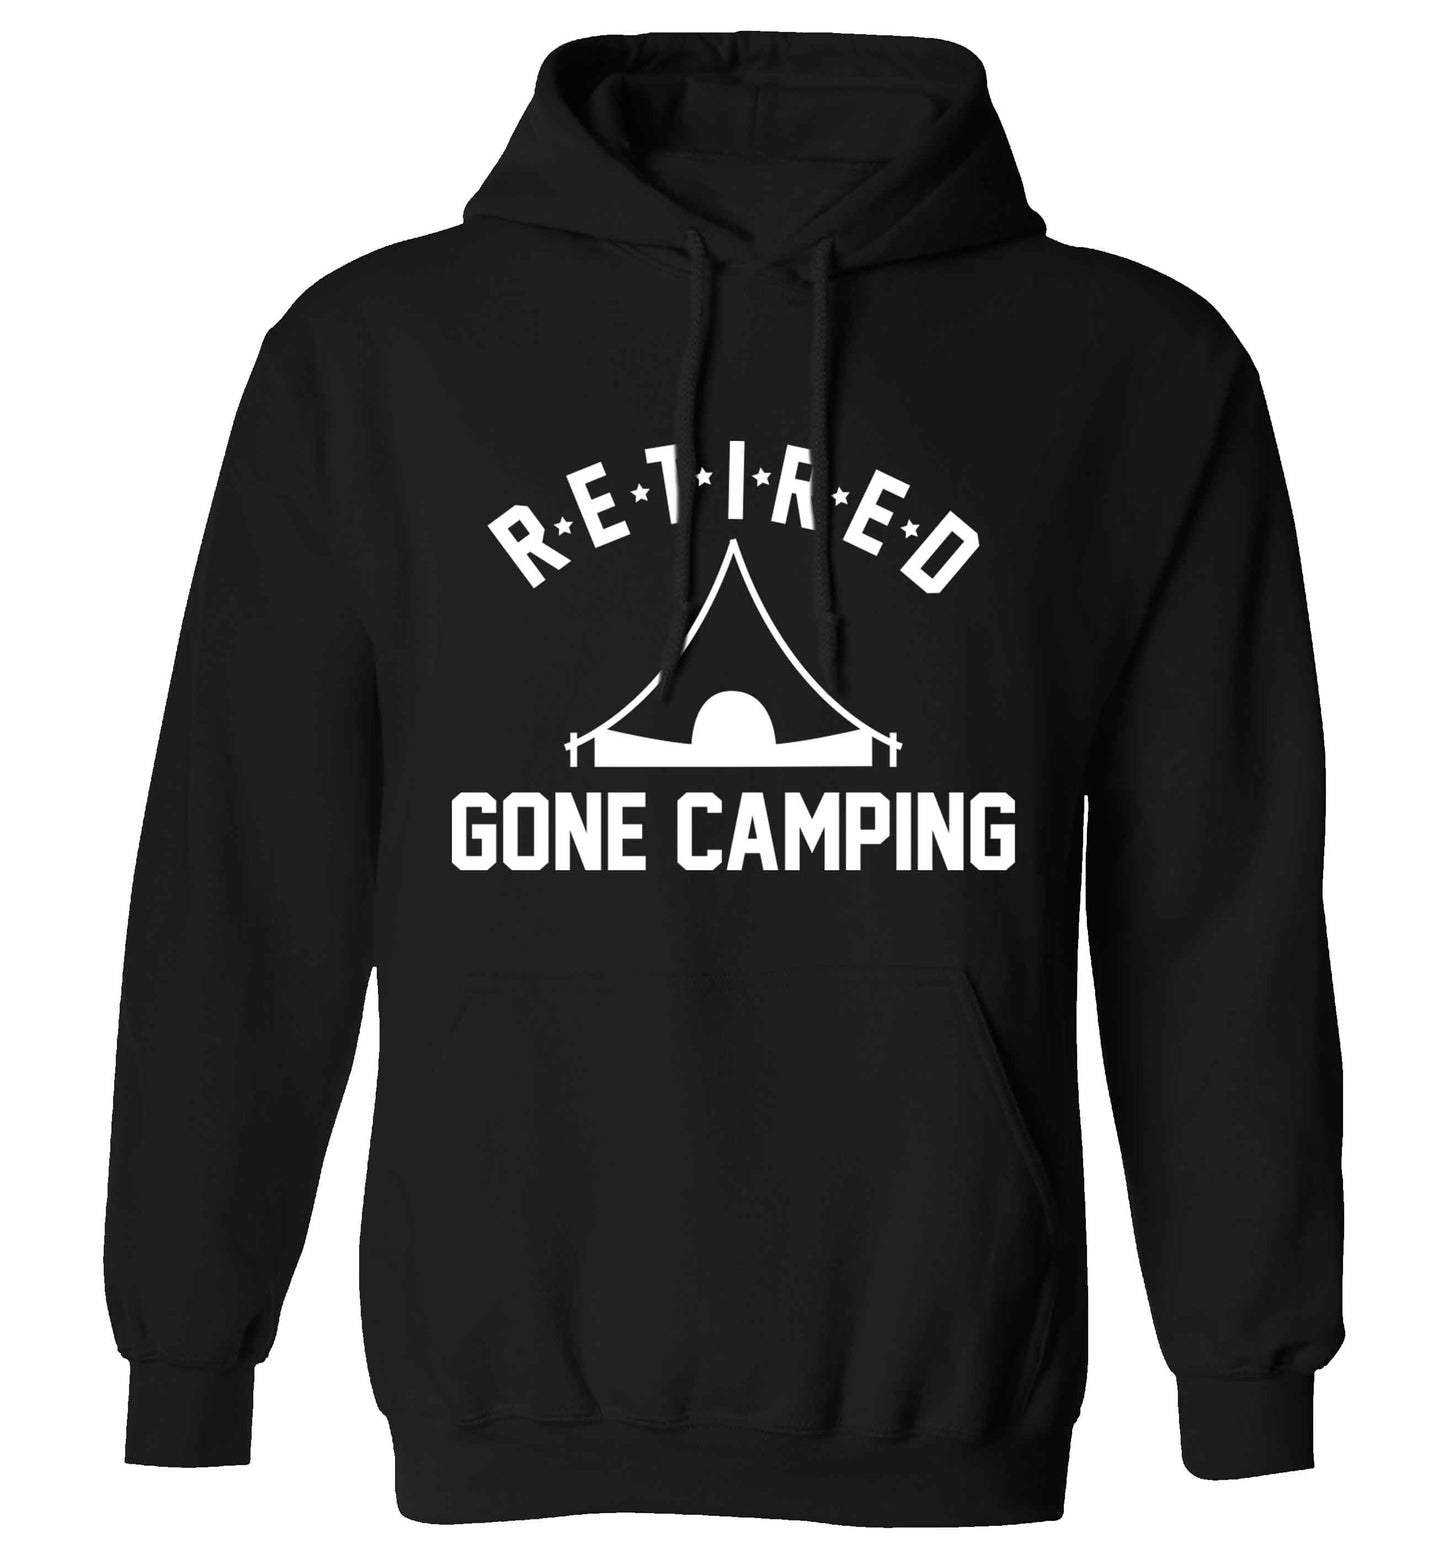 Retired gone camping adults unisex black hoodie 2XL